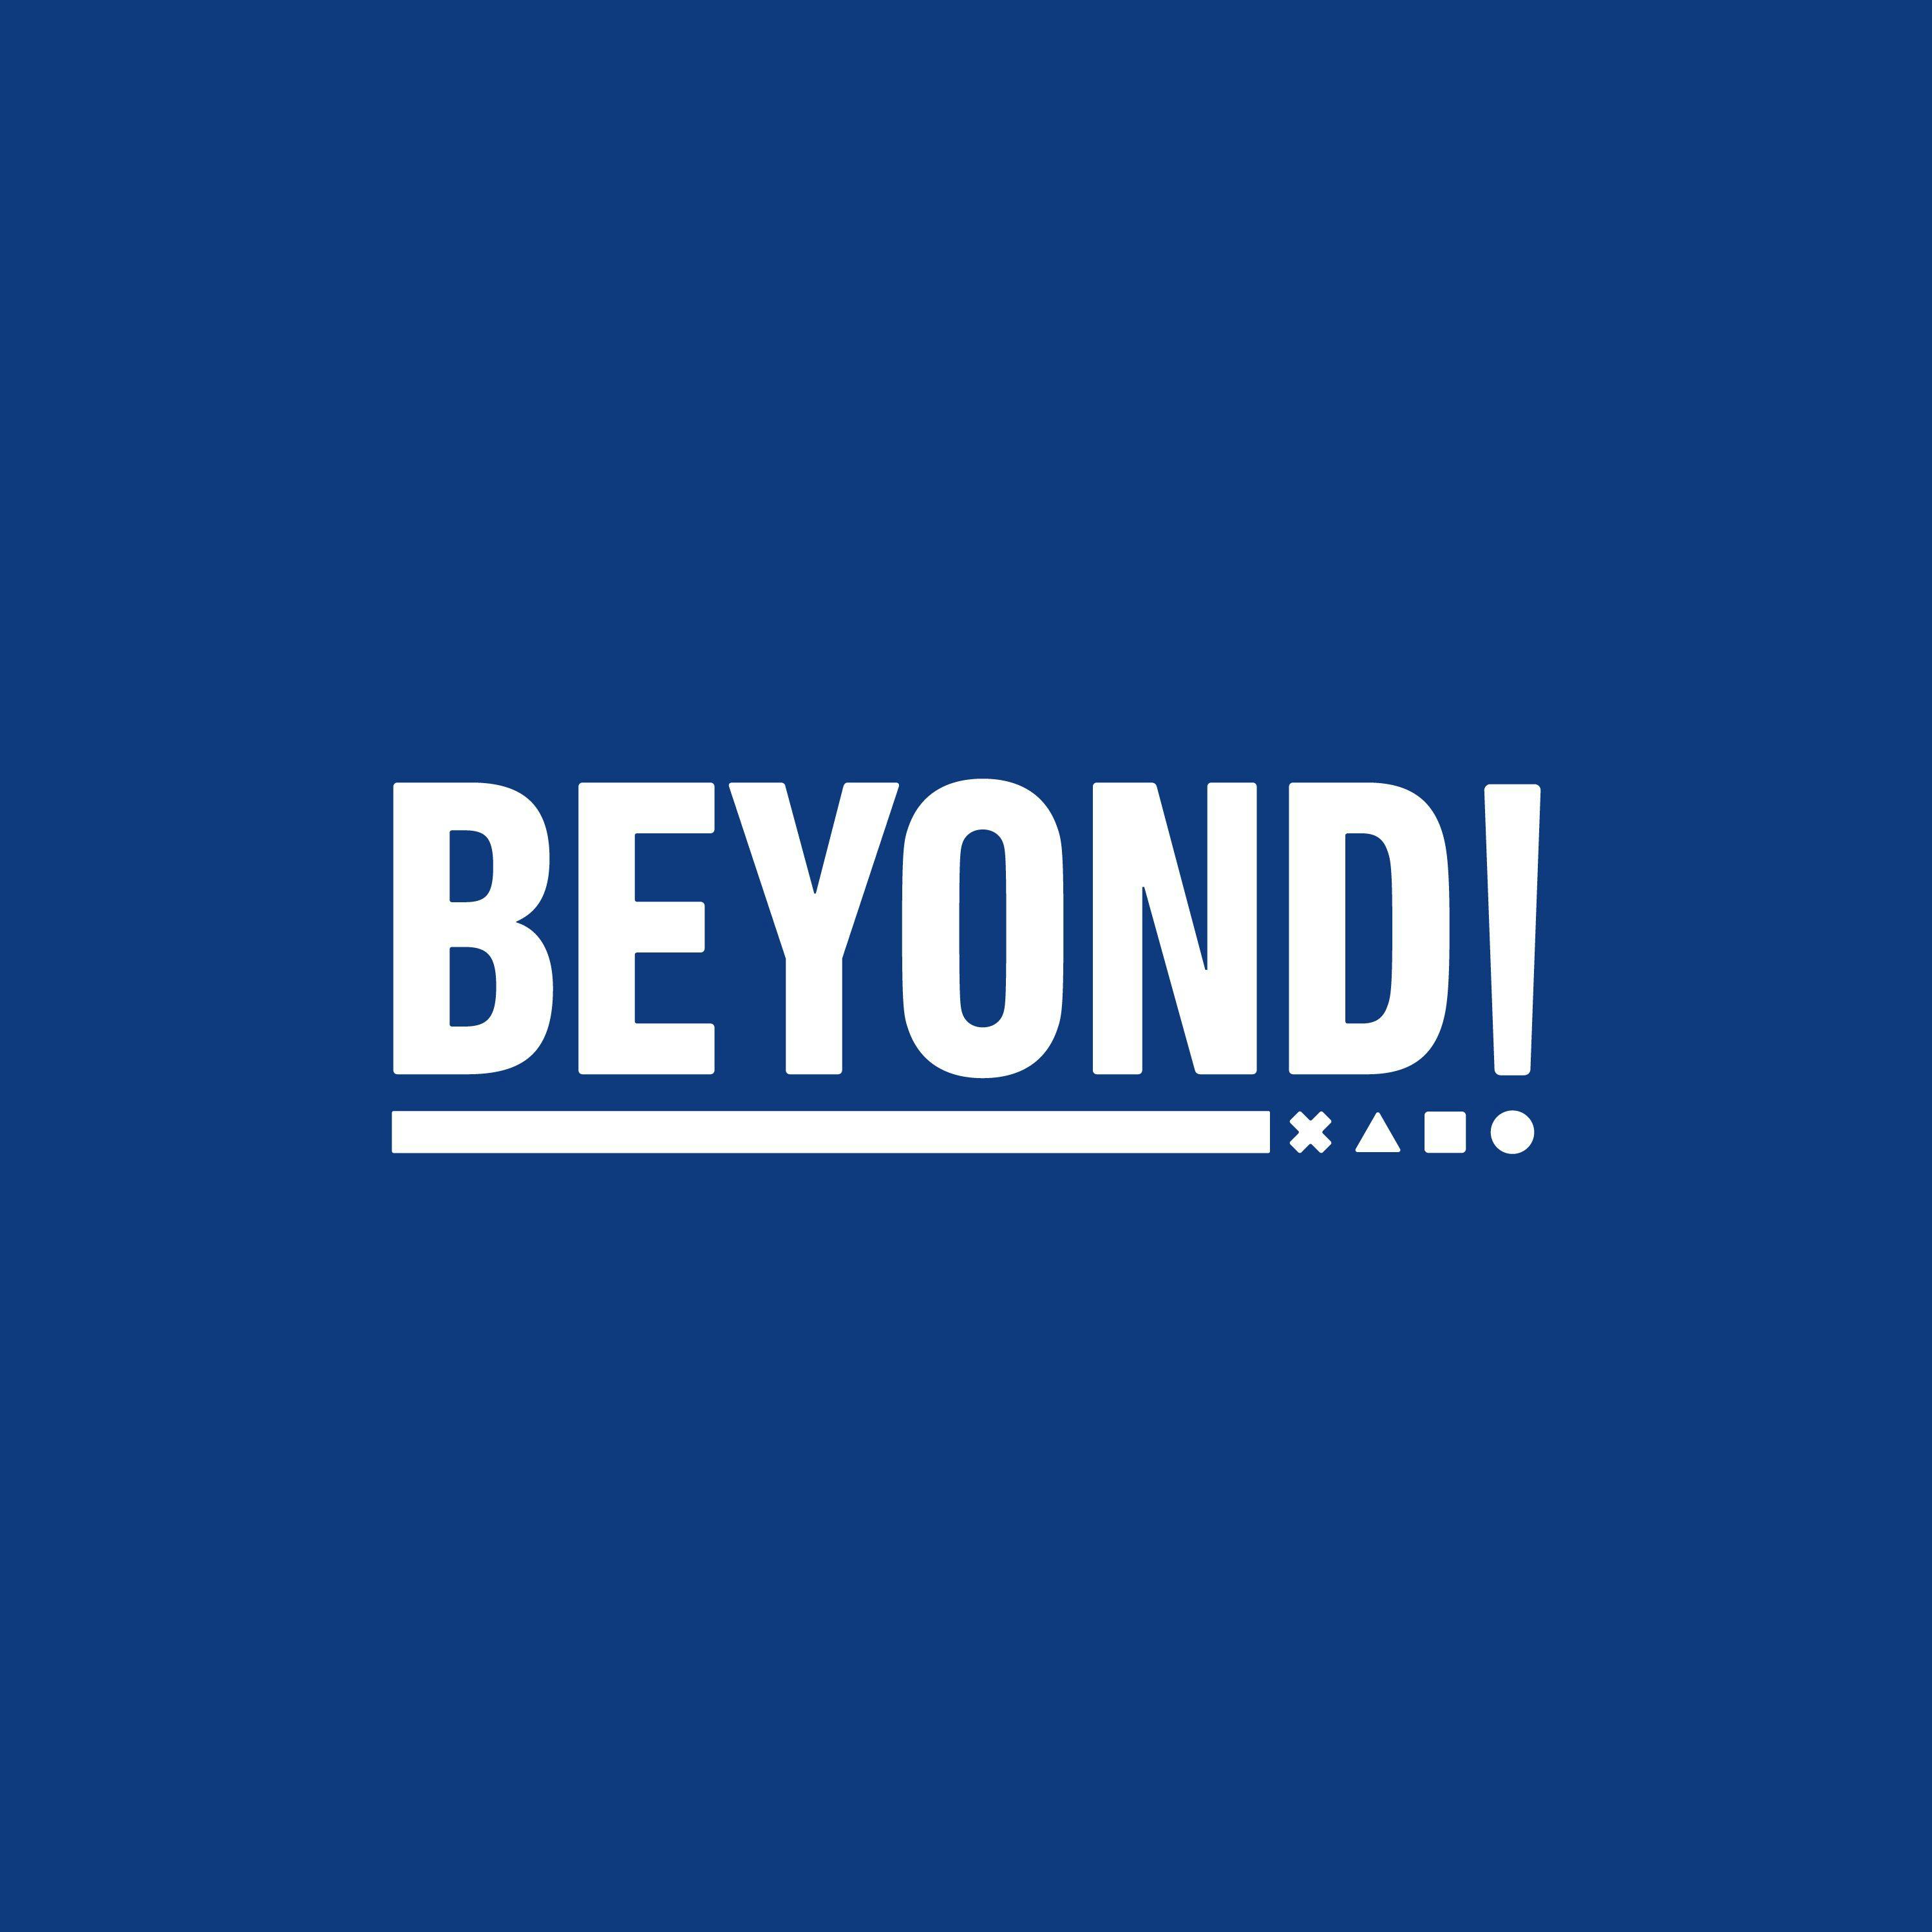 PS5: How Sony Can Maintain Excitement in 2021 - Beyond Episode 682